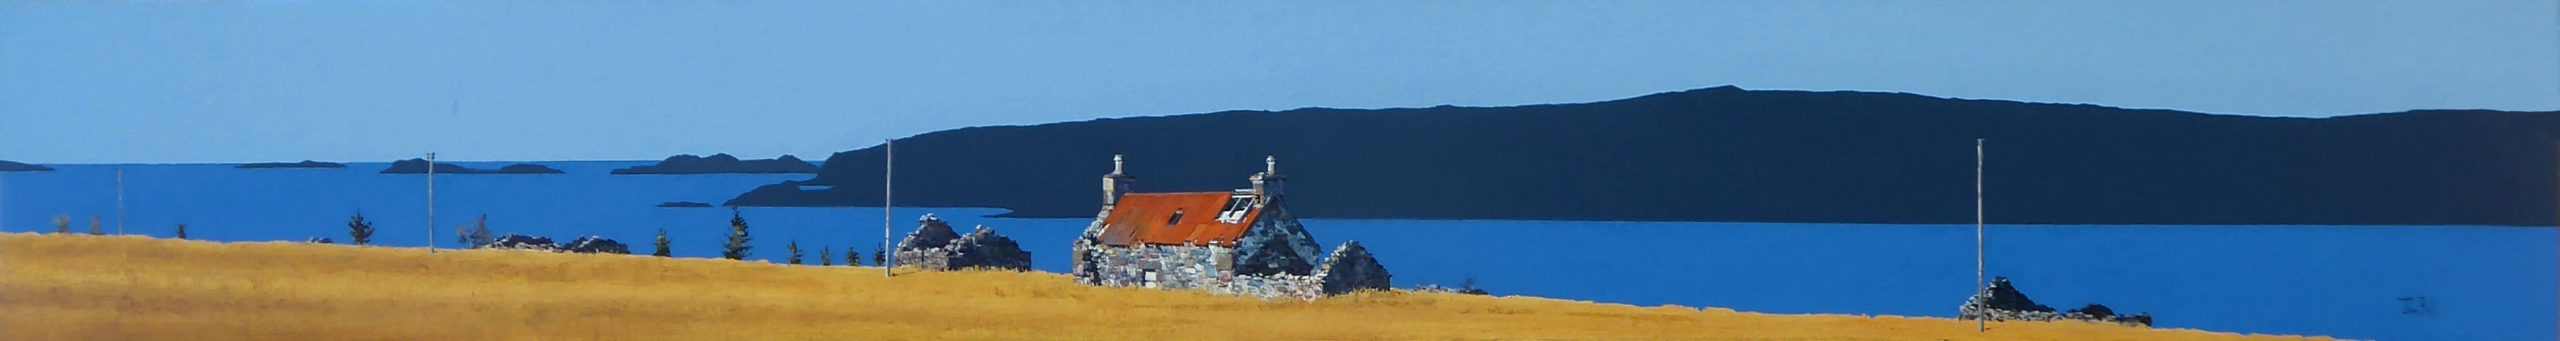 Ruin, Little Loch Broom and Summer Isles (size 60 x 8 inches)-min